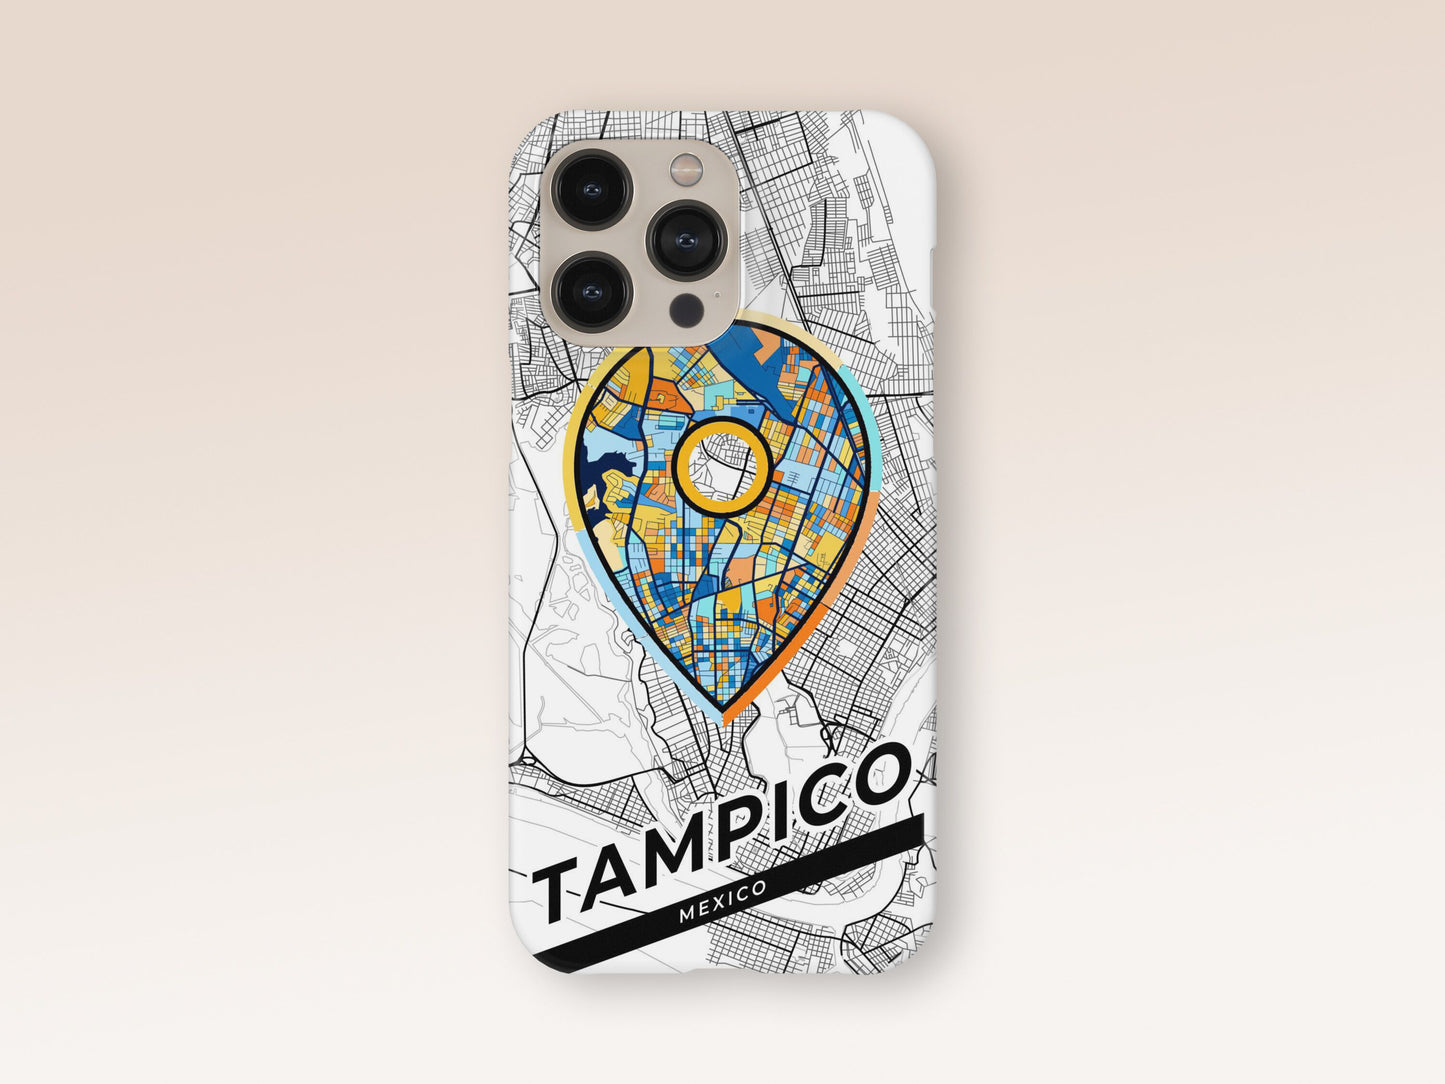 Tampico Mexico slim phone case with colorful icon 1